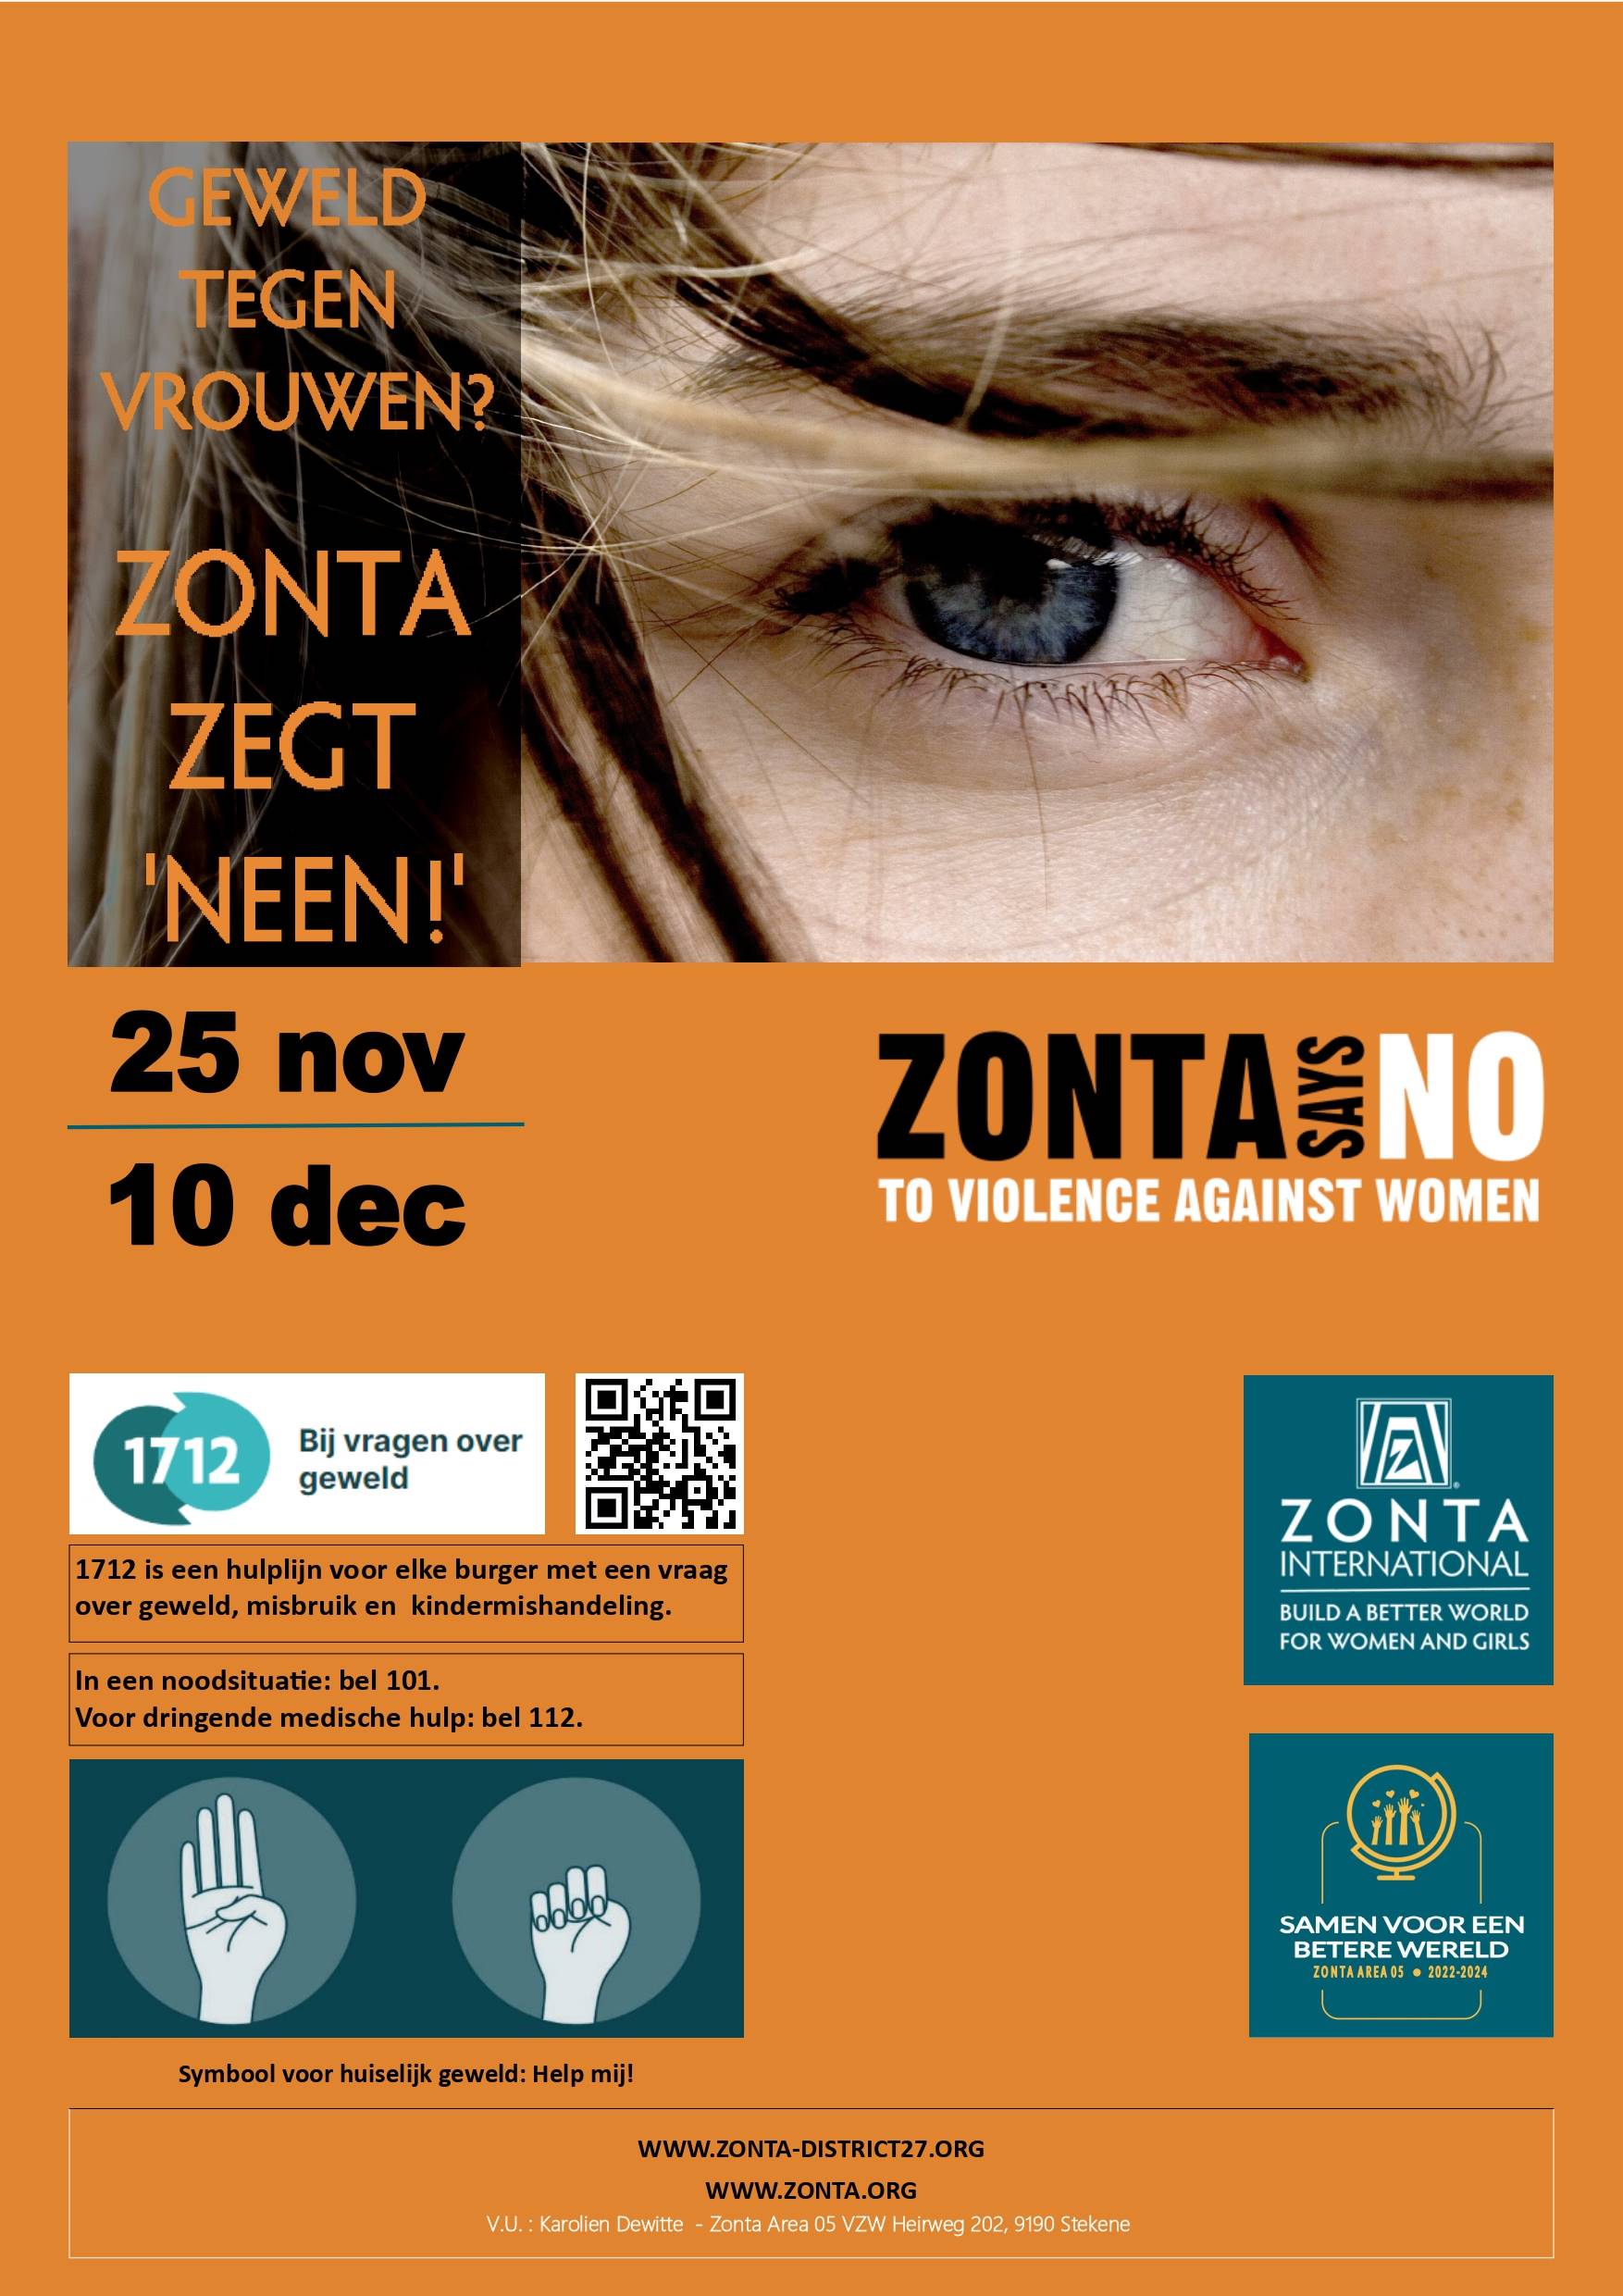 Zonta Says NO to Violence Against Women